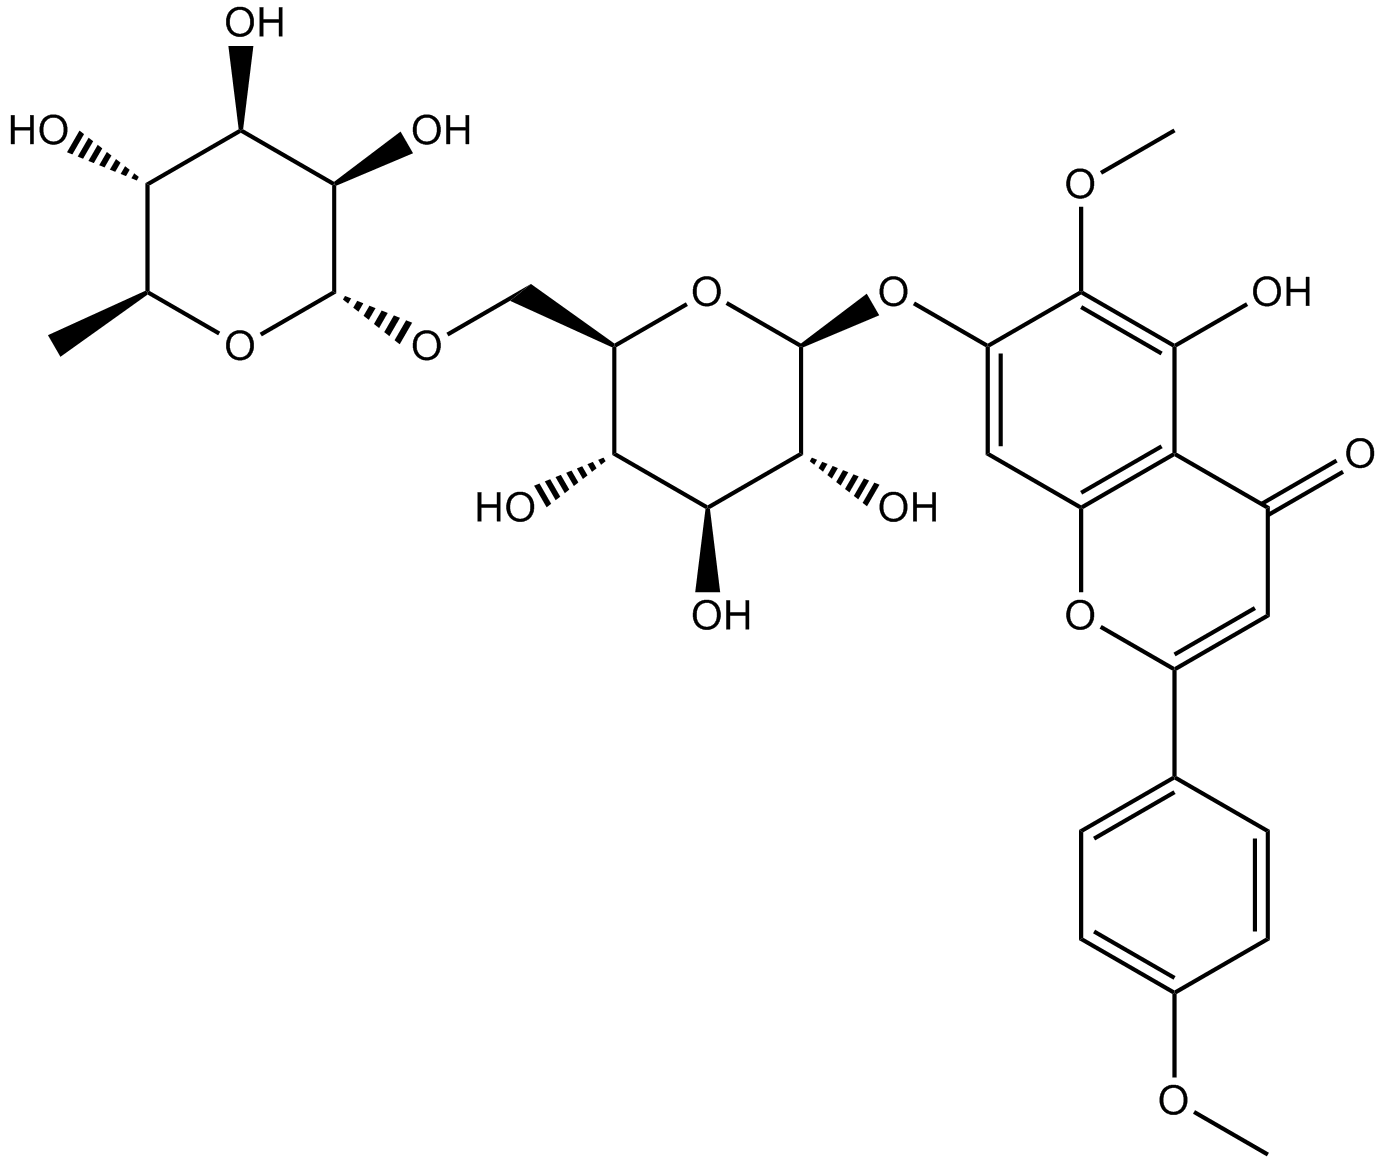 Pectolinarin Chemical Structure